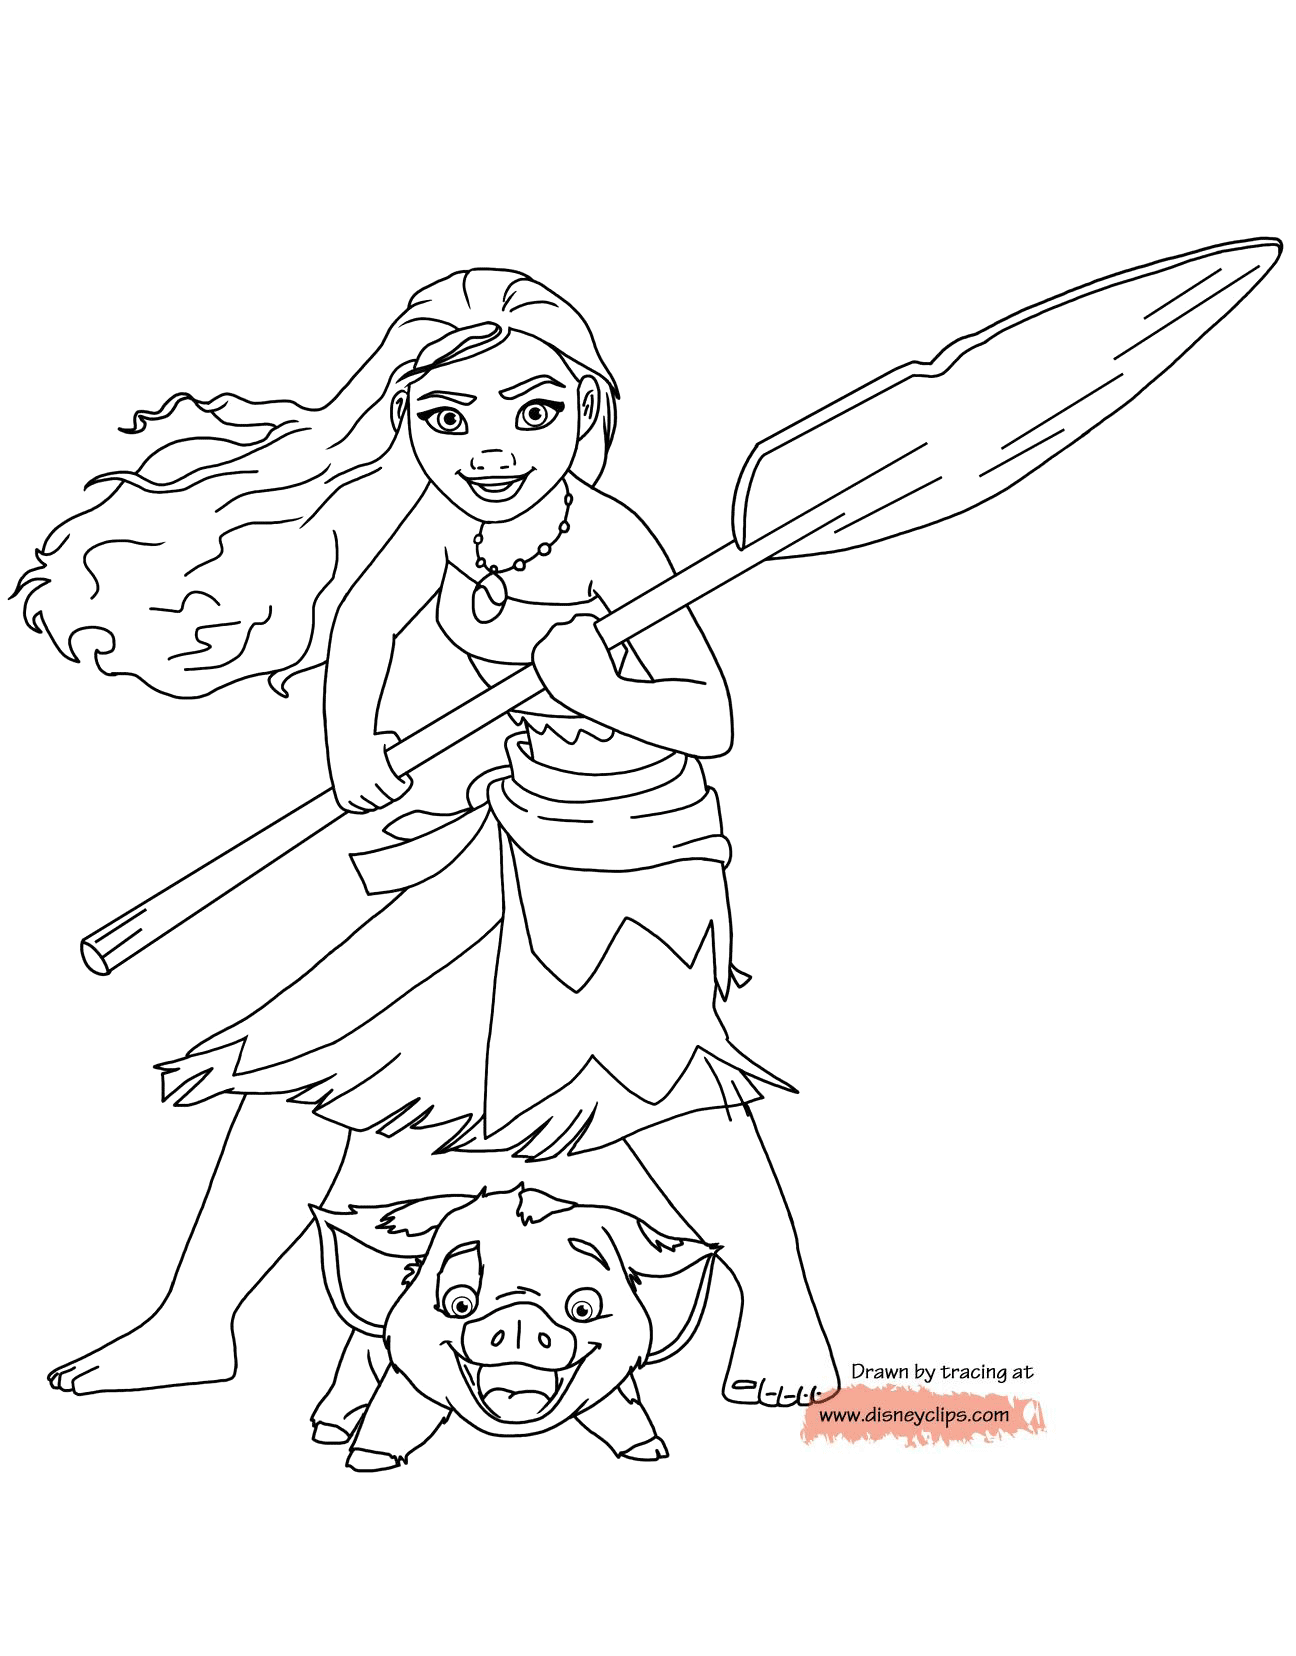 Disney's Moana Coloring Pages | Disneyclips.com